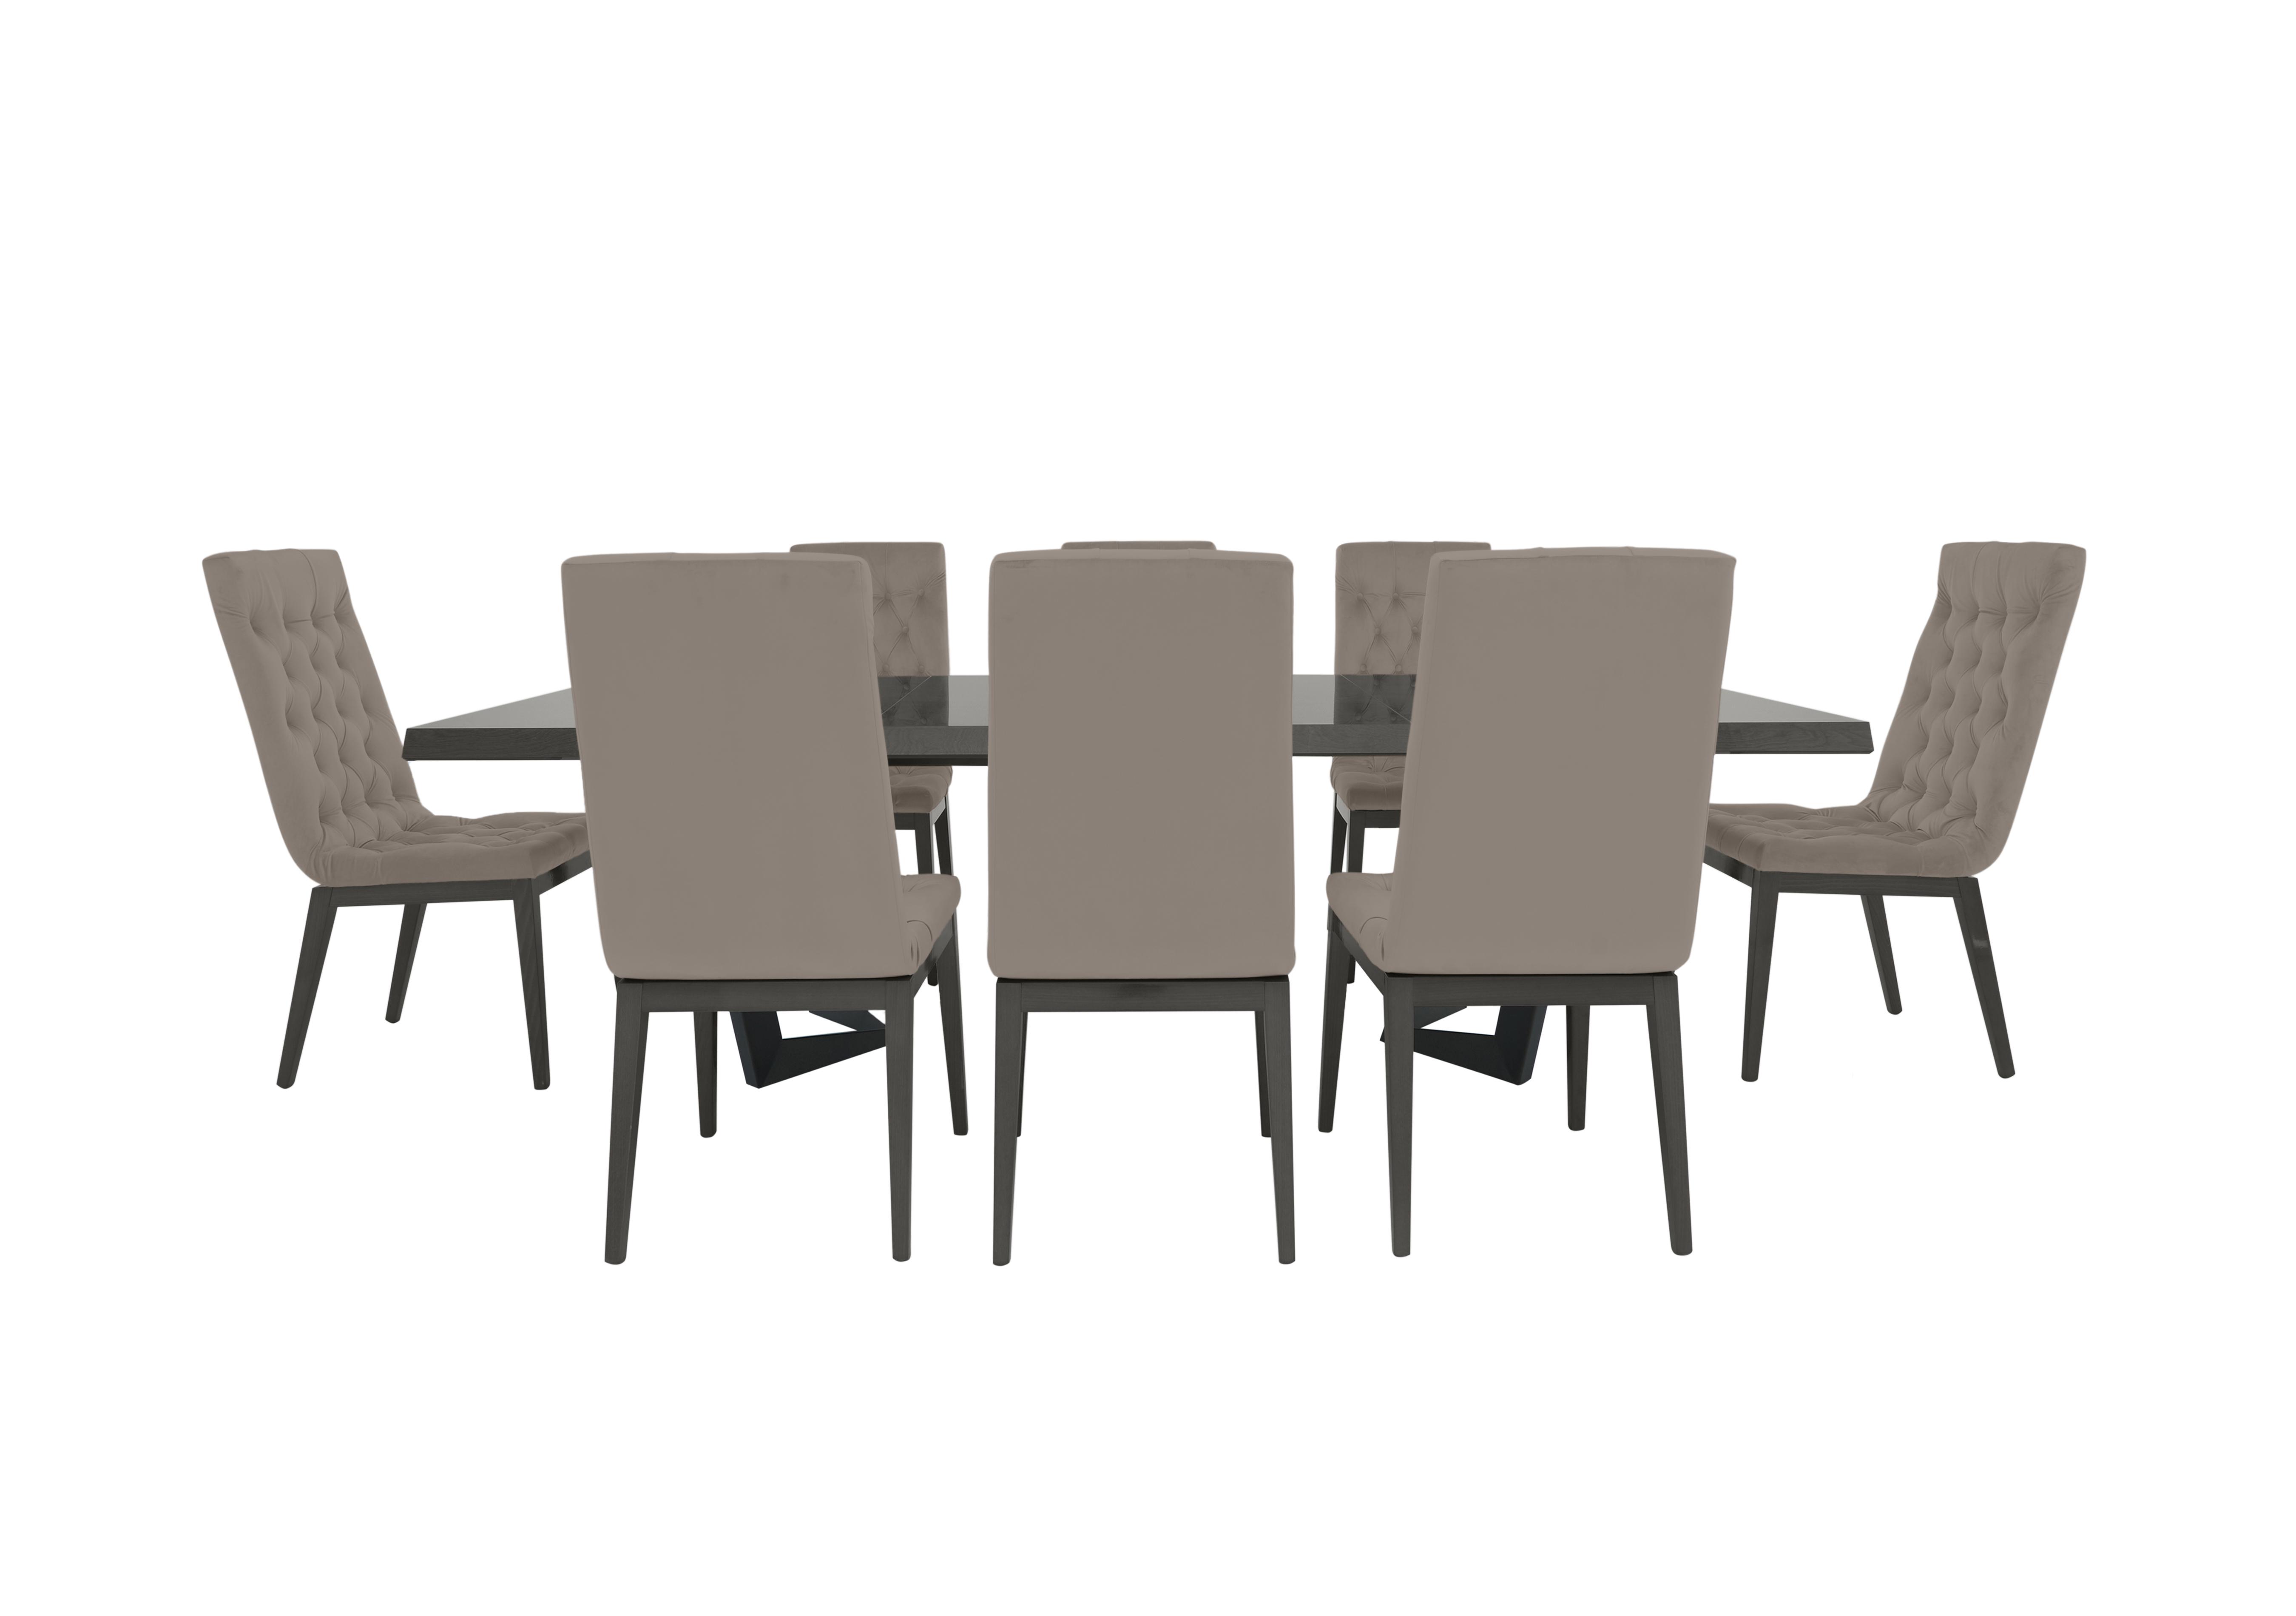 Palazzo 200cm Extending Dining Table in Silver Birch with 8 Capitonne Buttoned Dining Chairs in Scarlet 359 09 Taupe on Furniture Village